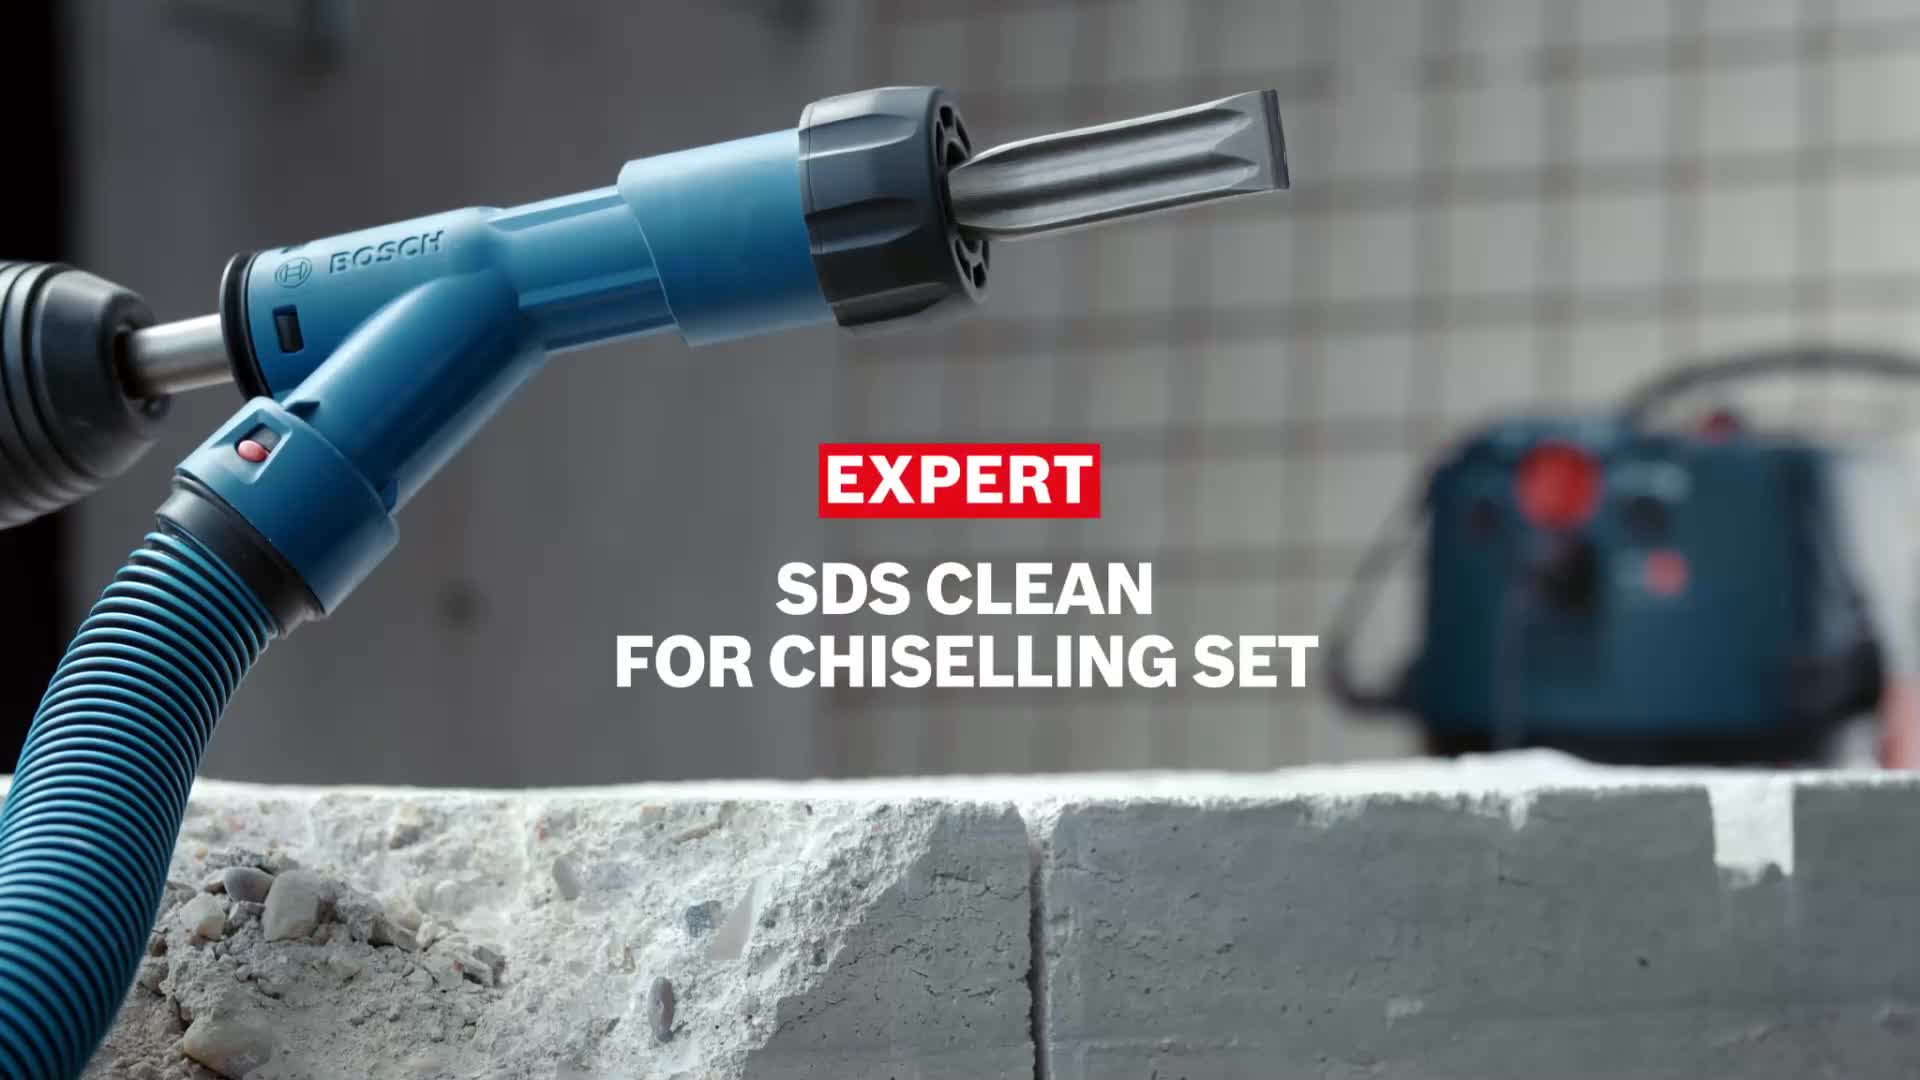 EXPERT SDS Clean for Chiselling Set